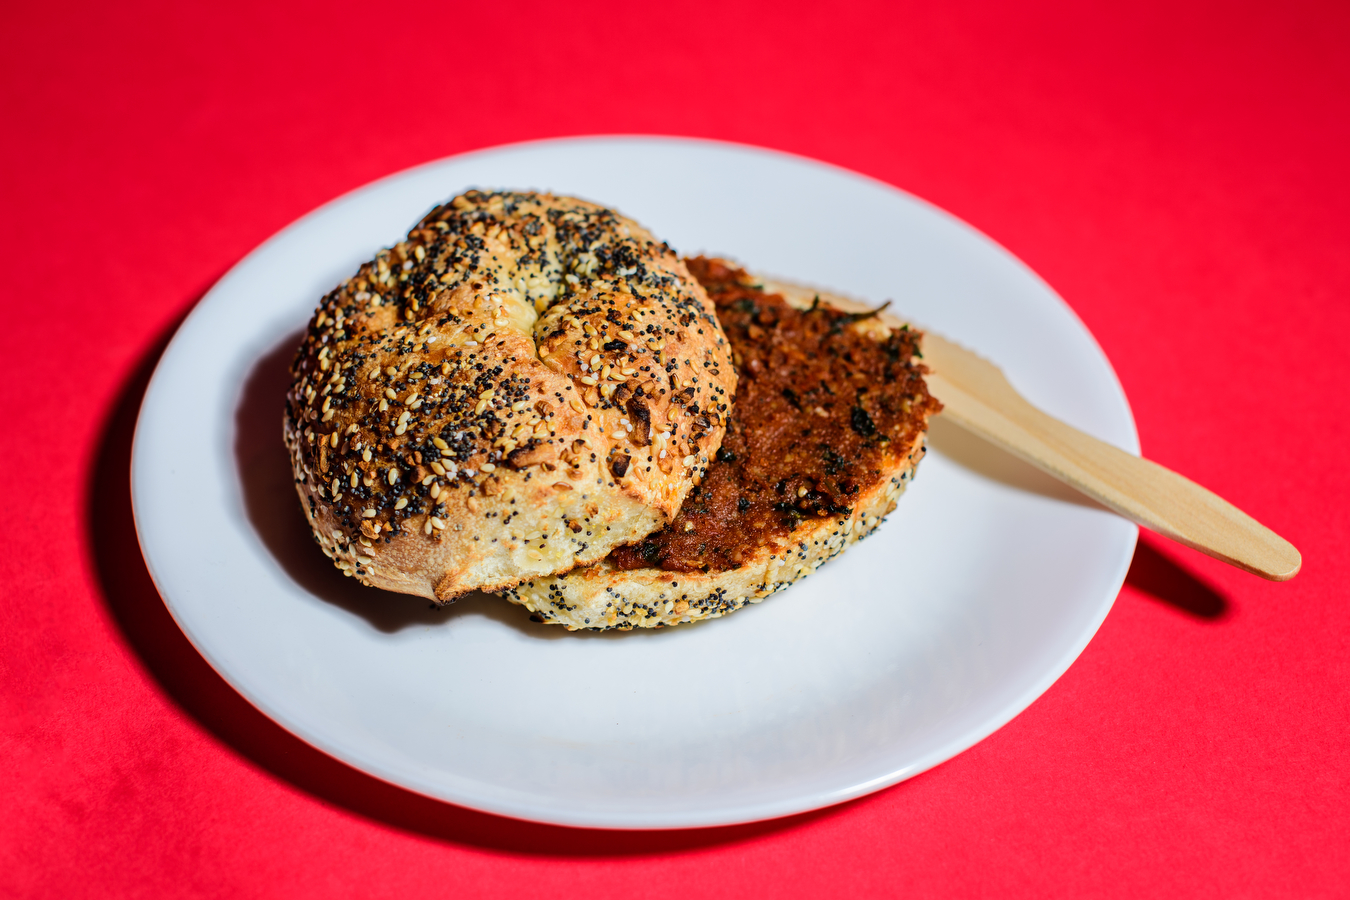 sesame and poppyseed bagel on a plate